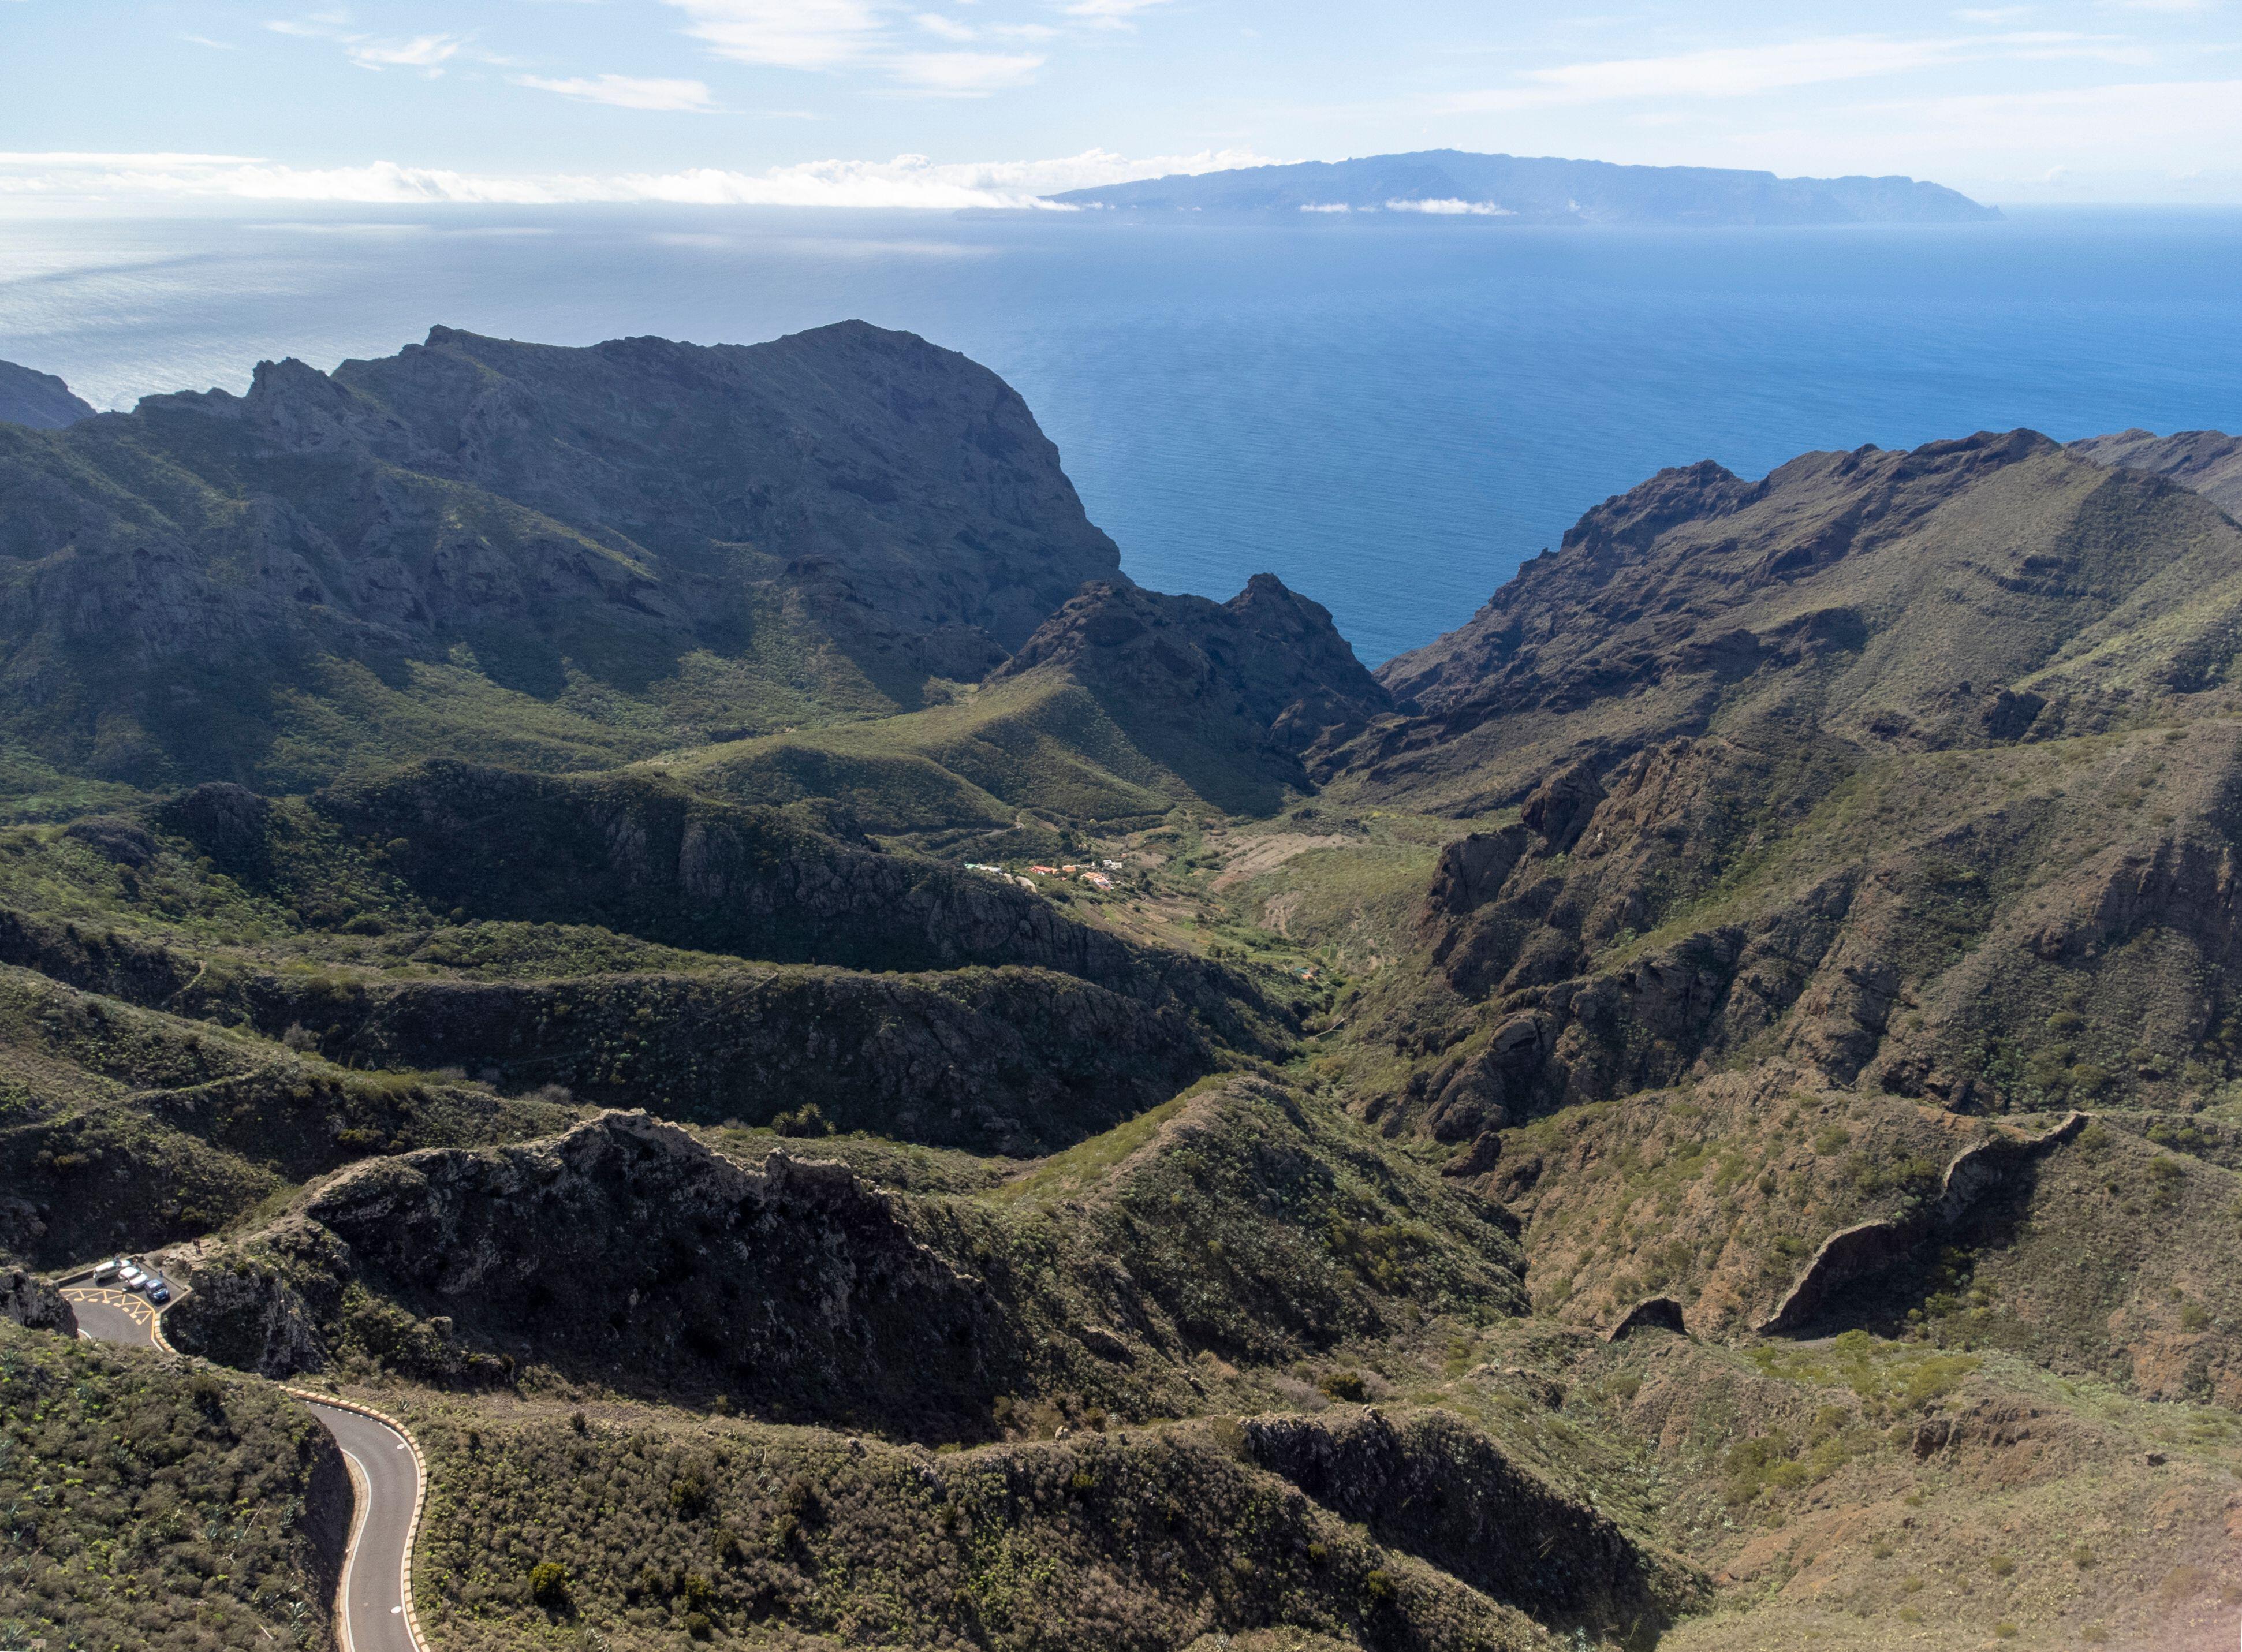 Mountains and a road in Rural de Teno park in Tenerife, Canary Islands